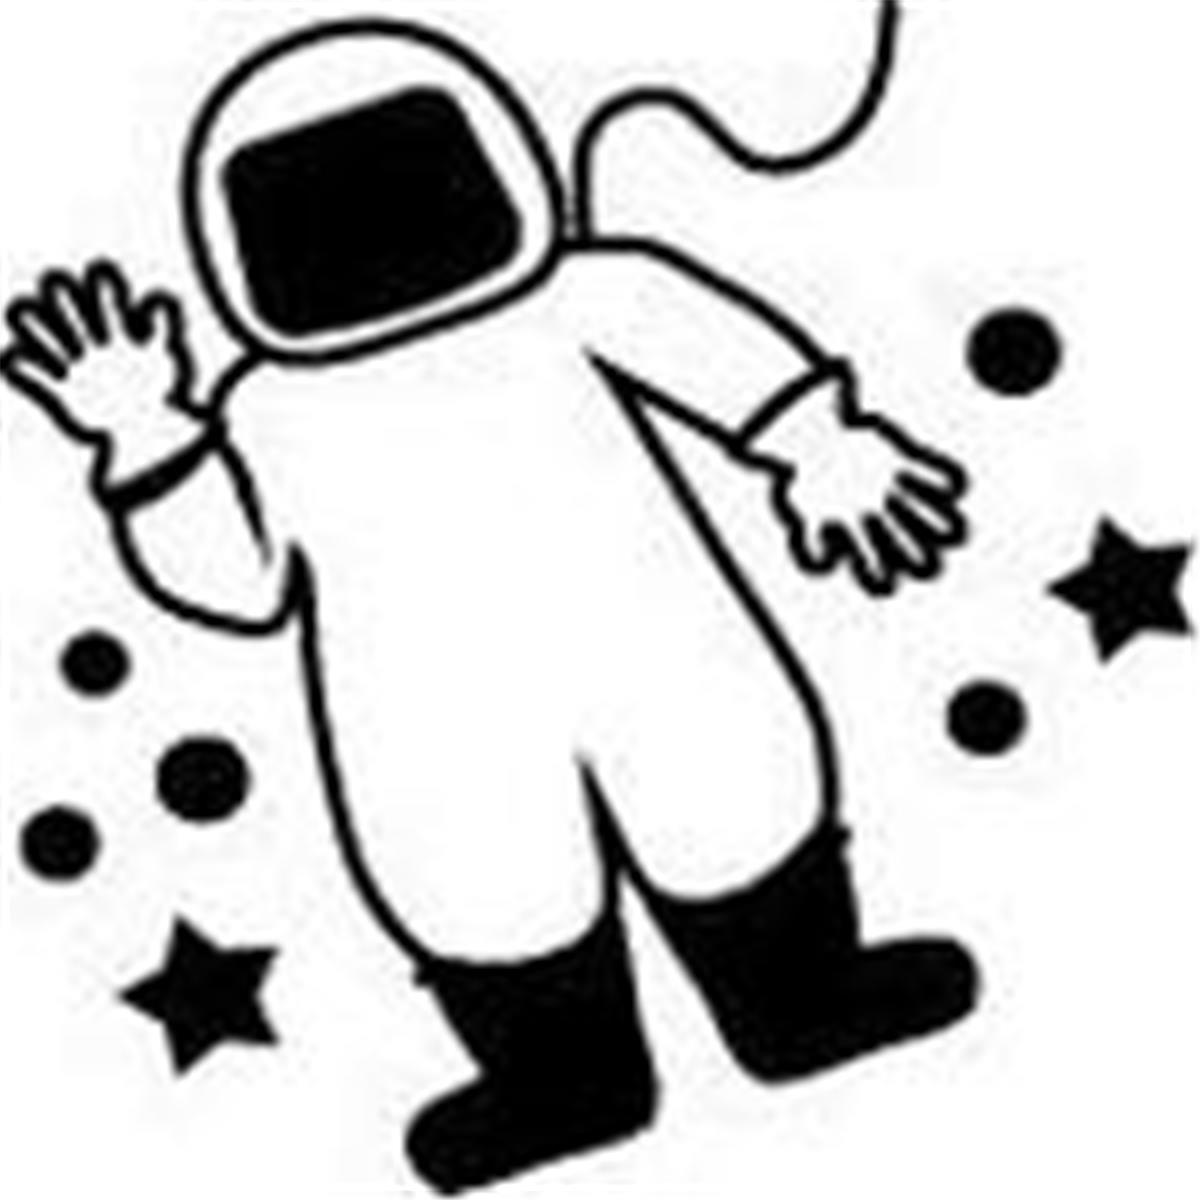 Picture of Creative Shapes Etc SE-0390 0.5 x 0.5 in. Incentive Stamp - Astronaut